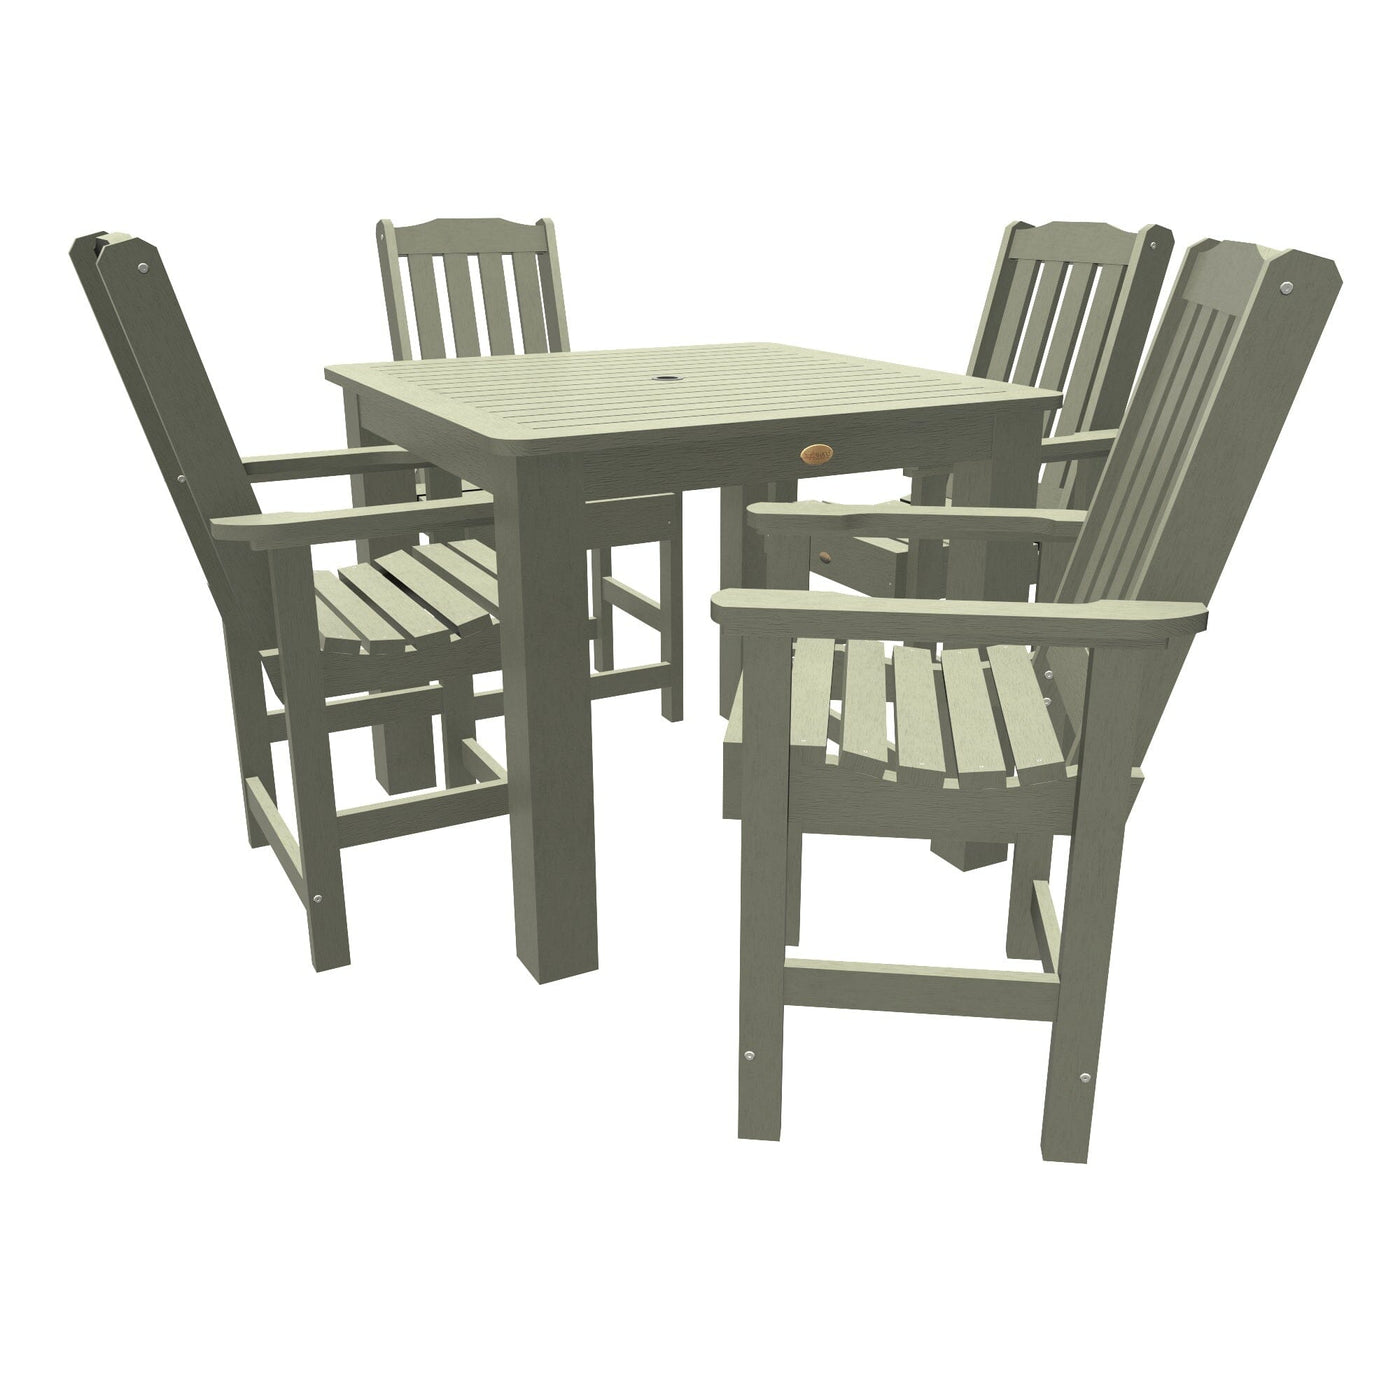 Lehigh 5pc Square Dining Set 42in x 42in - Counter Height Dining Highwood USA Eucalyptus 